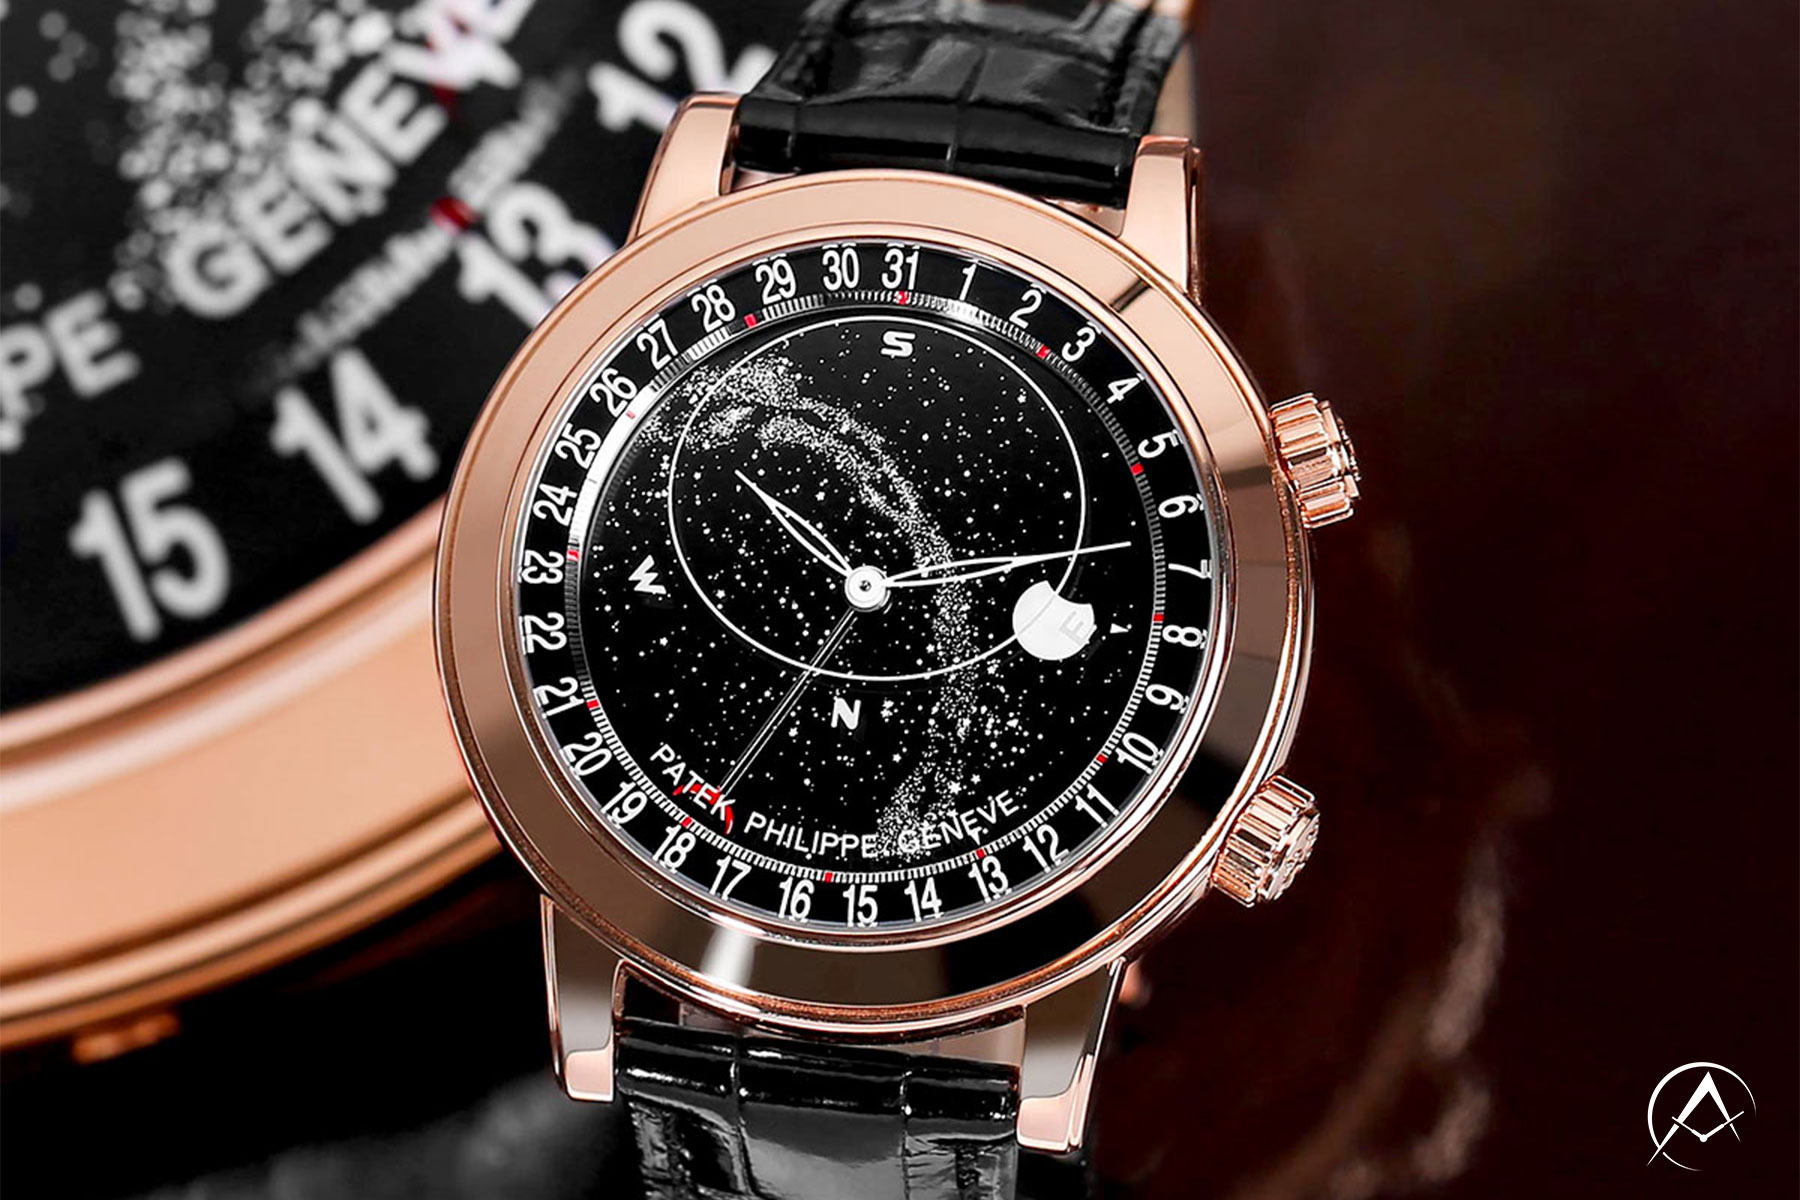 Patek Philippe Grand Complications with 18K Rose Gold Bezel, Black Dial, Moonphase Complication, and Black Leather Strap